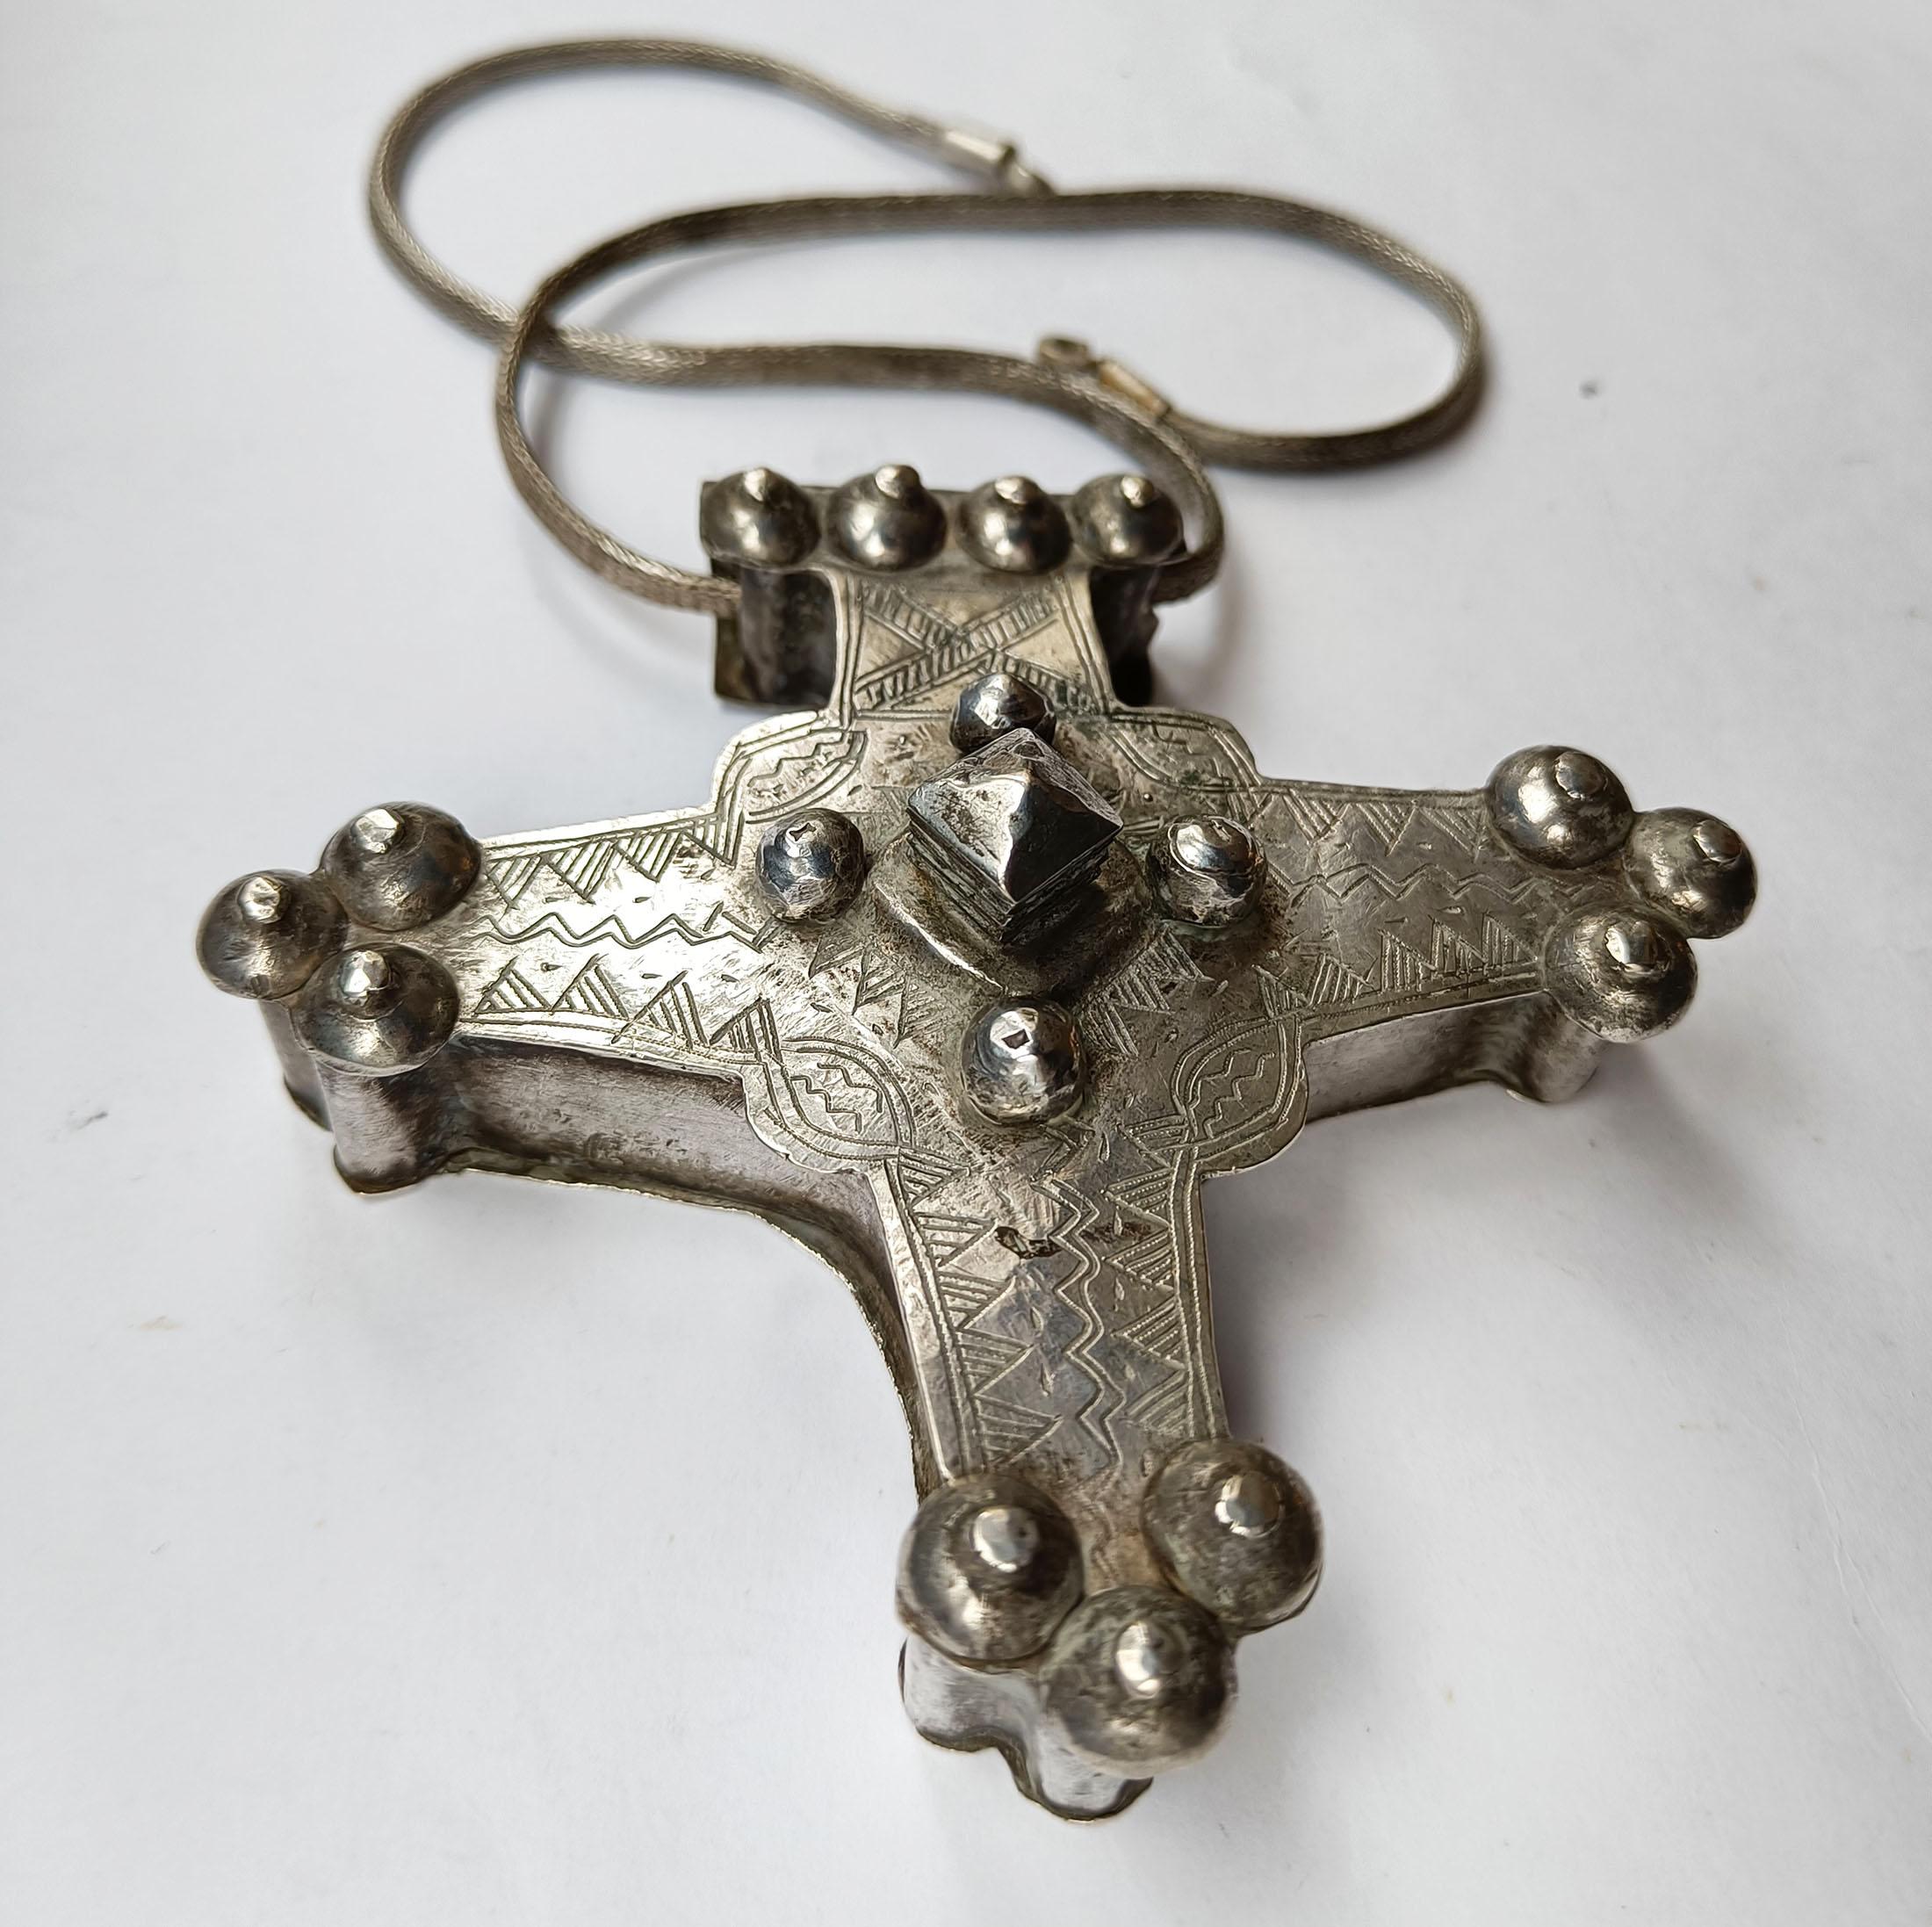 Fine  Large Antique Berber or Tuareg Southern Cross Pendant 
This is a superb large fine old Berber silver talisman known as the Southern Cross or Boghdod from the southern Moroccan/Mauritania pre-Sahara Desert
In the region children are present